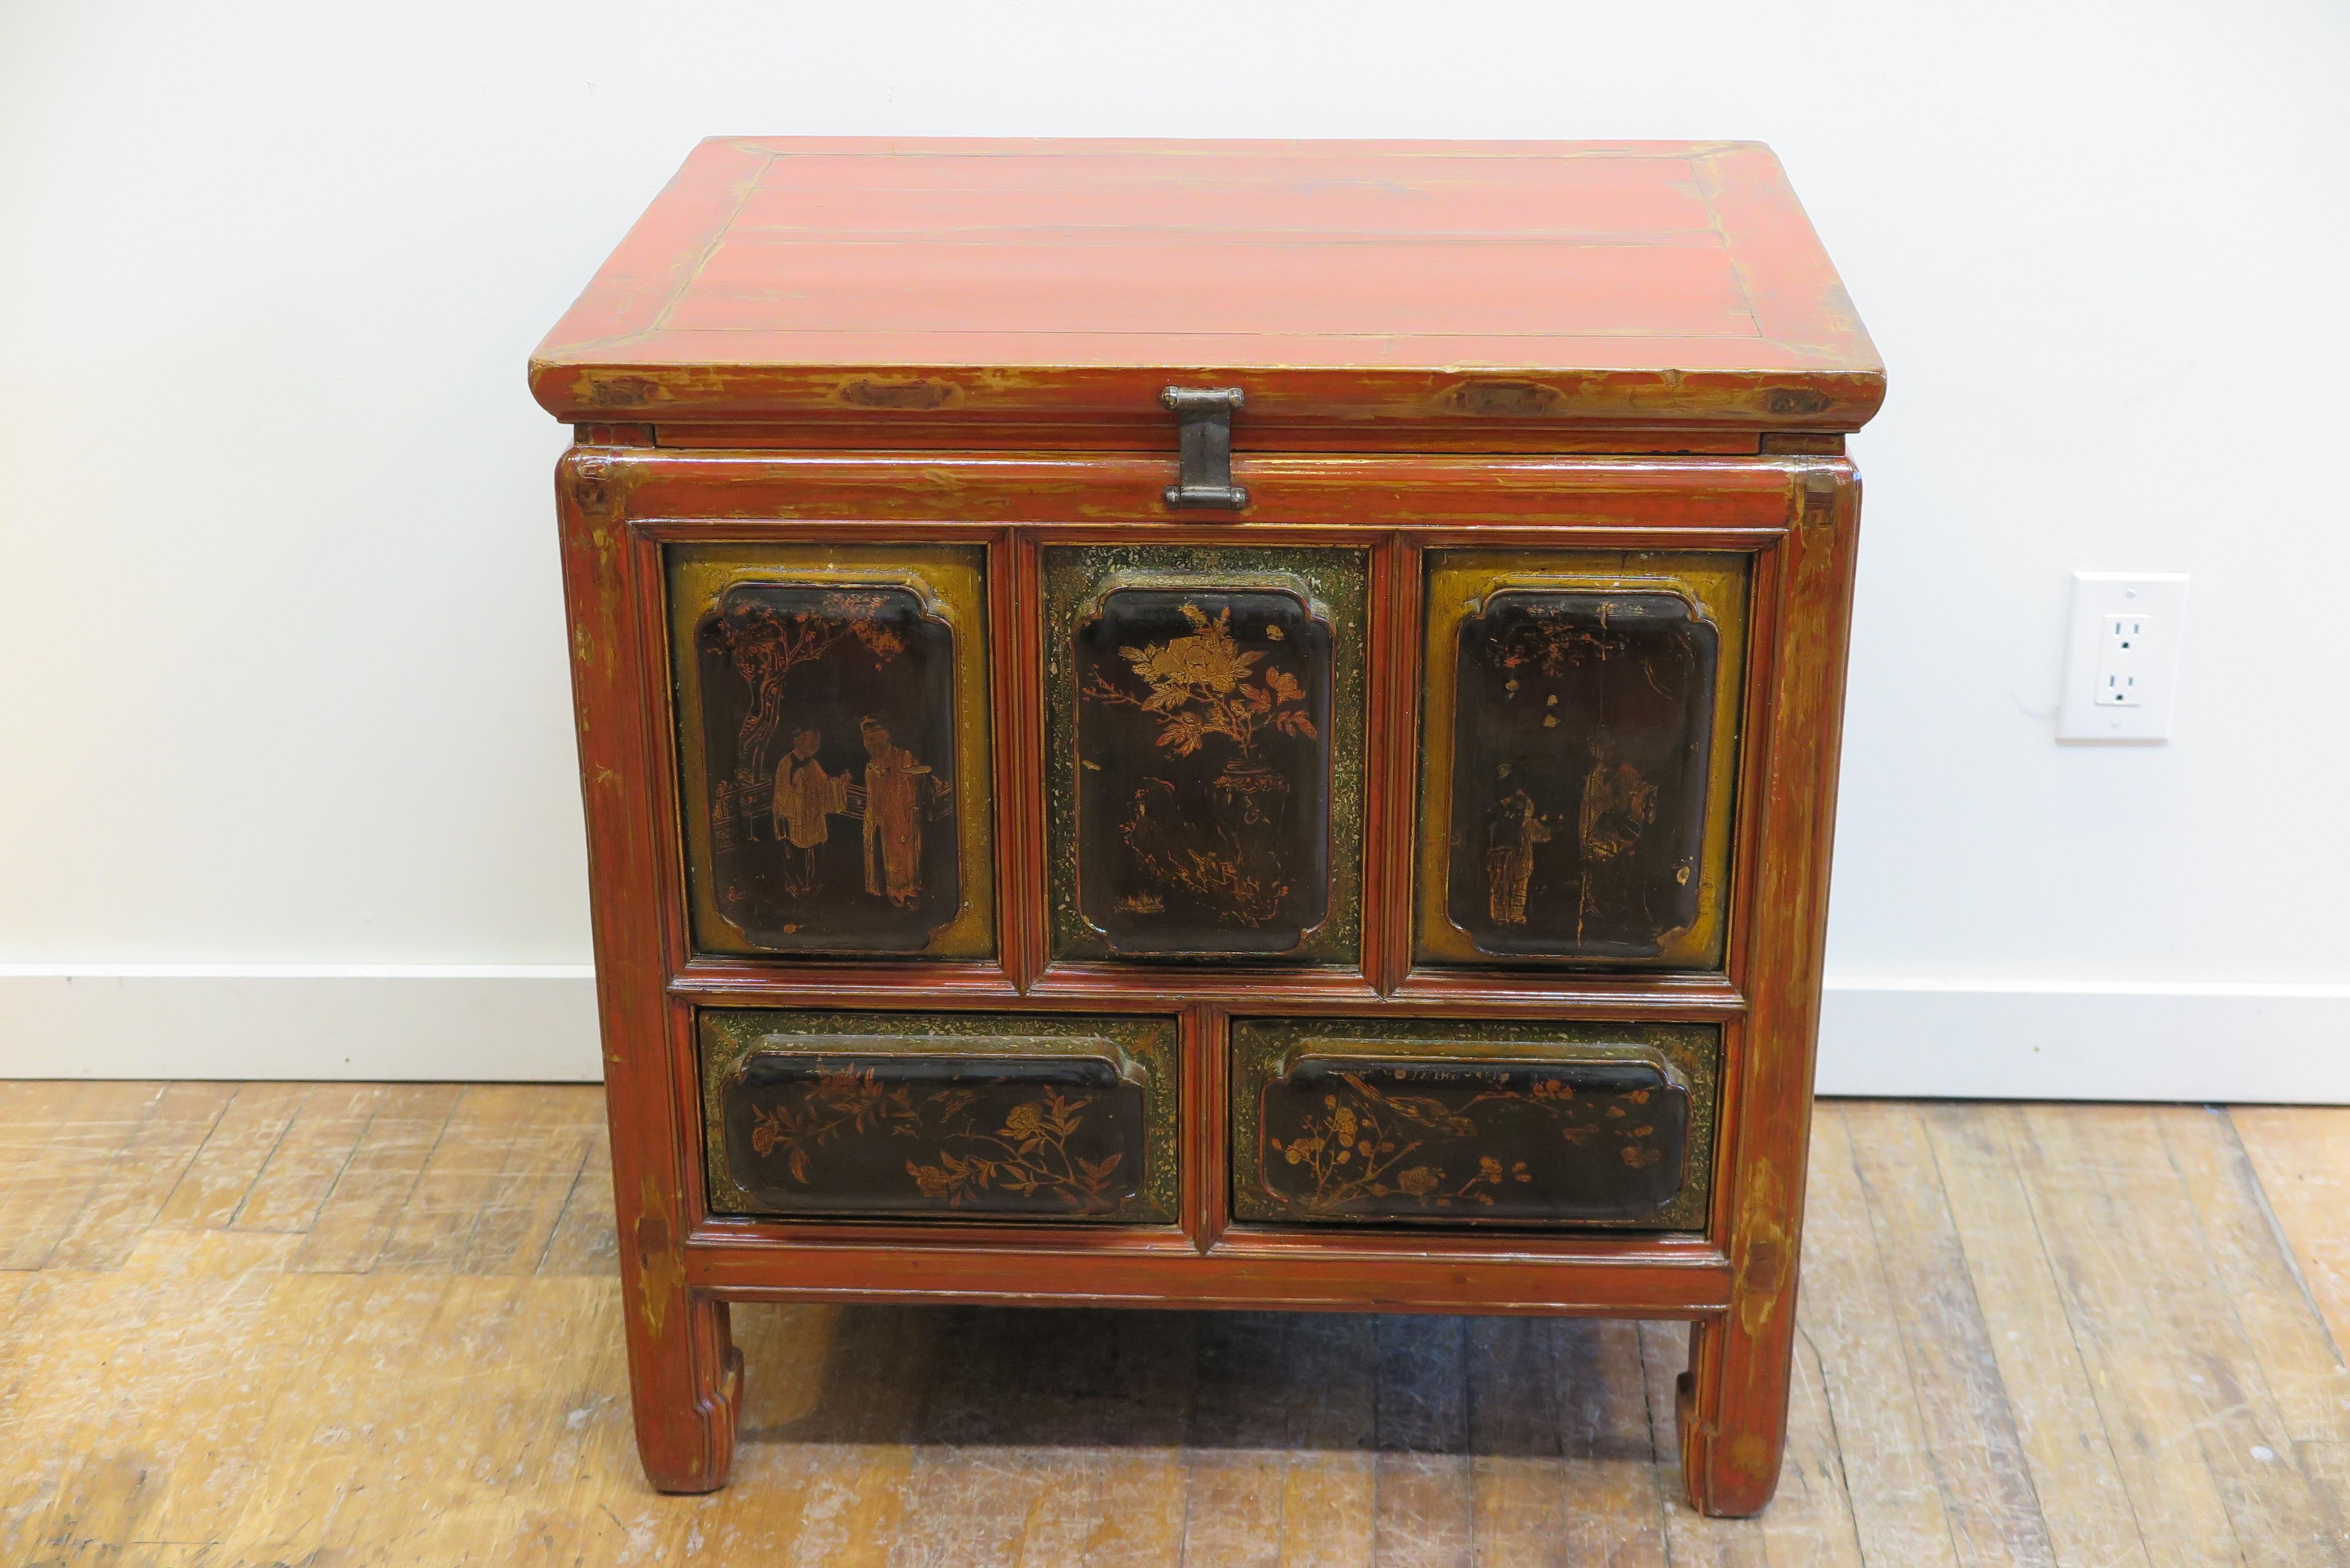 Chinese Qing Dynasty chest with drawers. Accentuated raised panels with scalloped edges make up all the front and side panels. Adorned with red lacquer decorated with regional images gold painted. The front panels have decorated borders highlighted